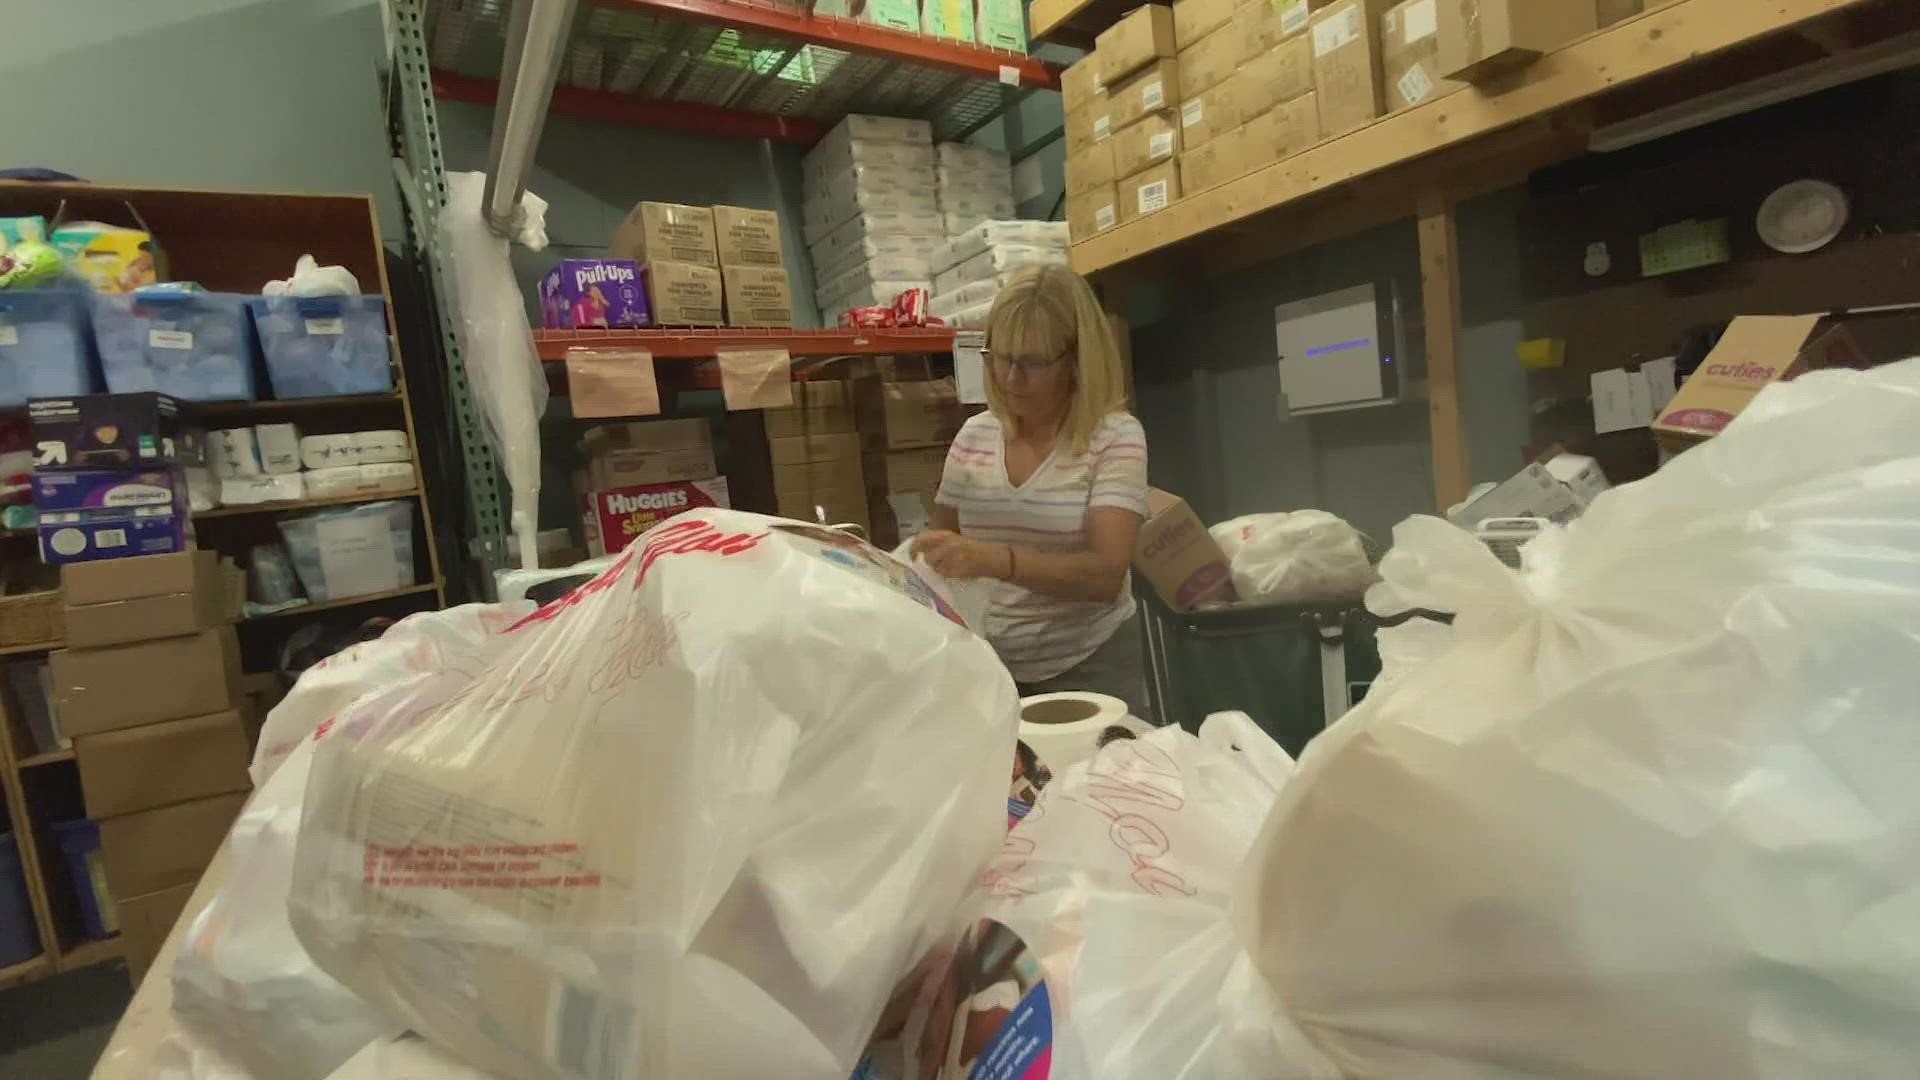 The organization has been growing since 1990 and handed out 1.5 million diapers and more than 12,000 cans of baby formula last year.